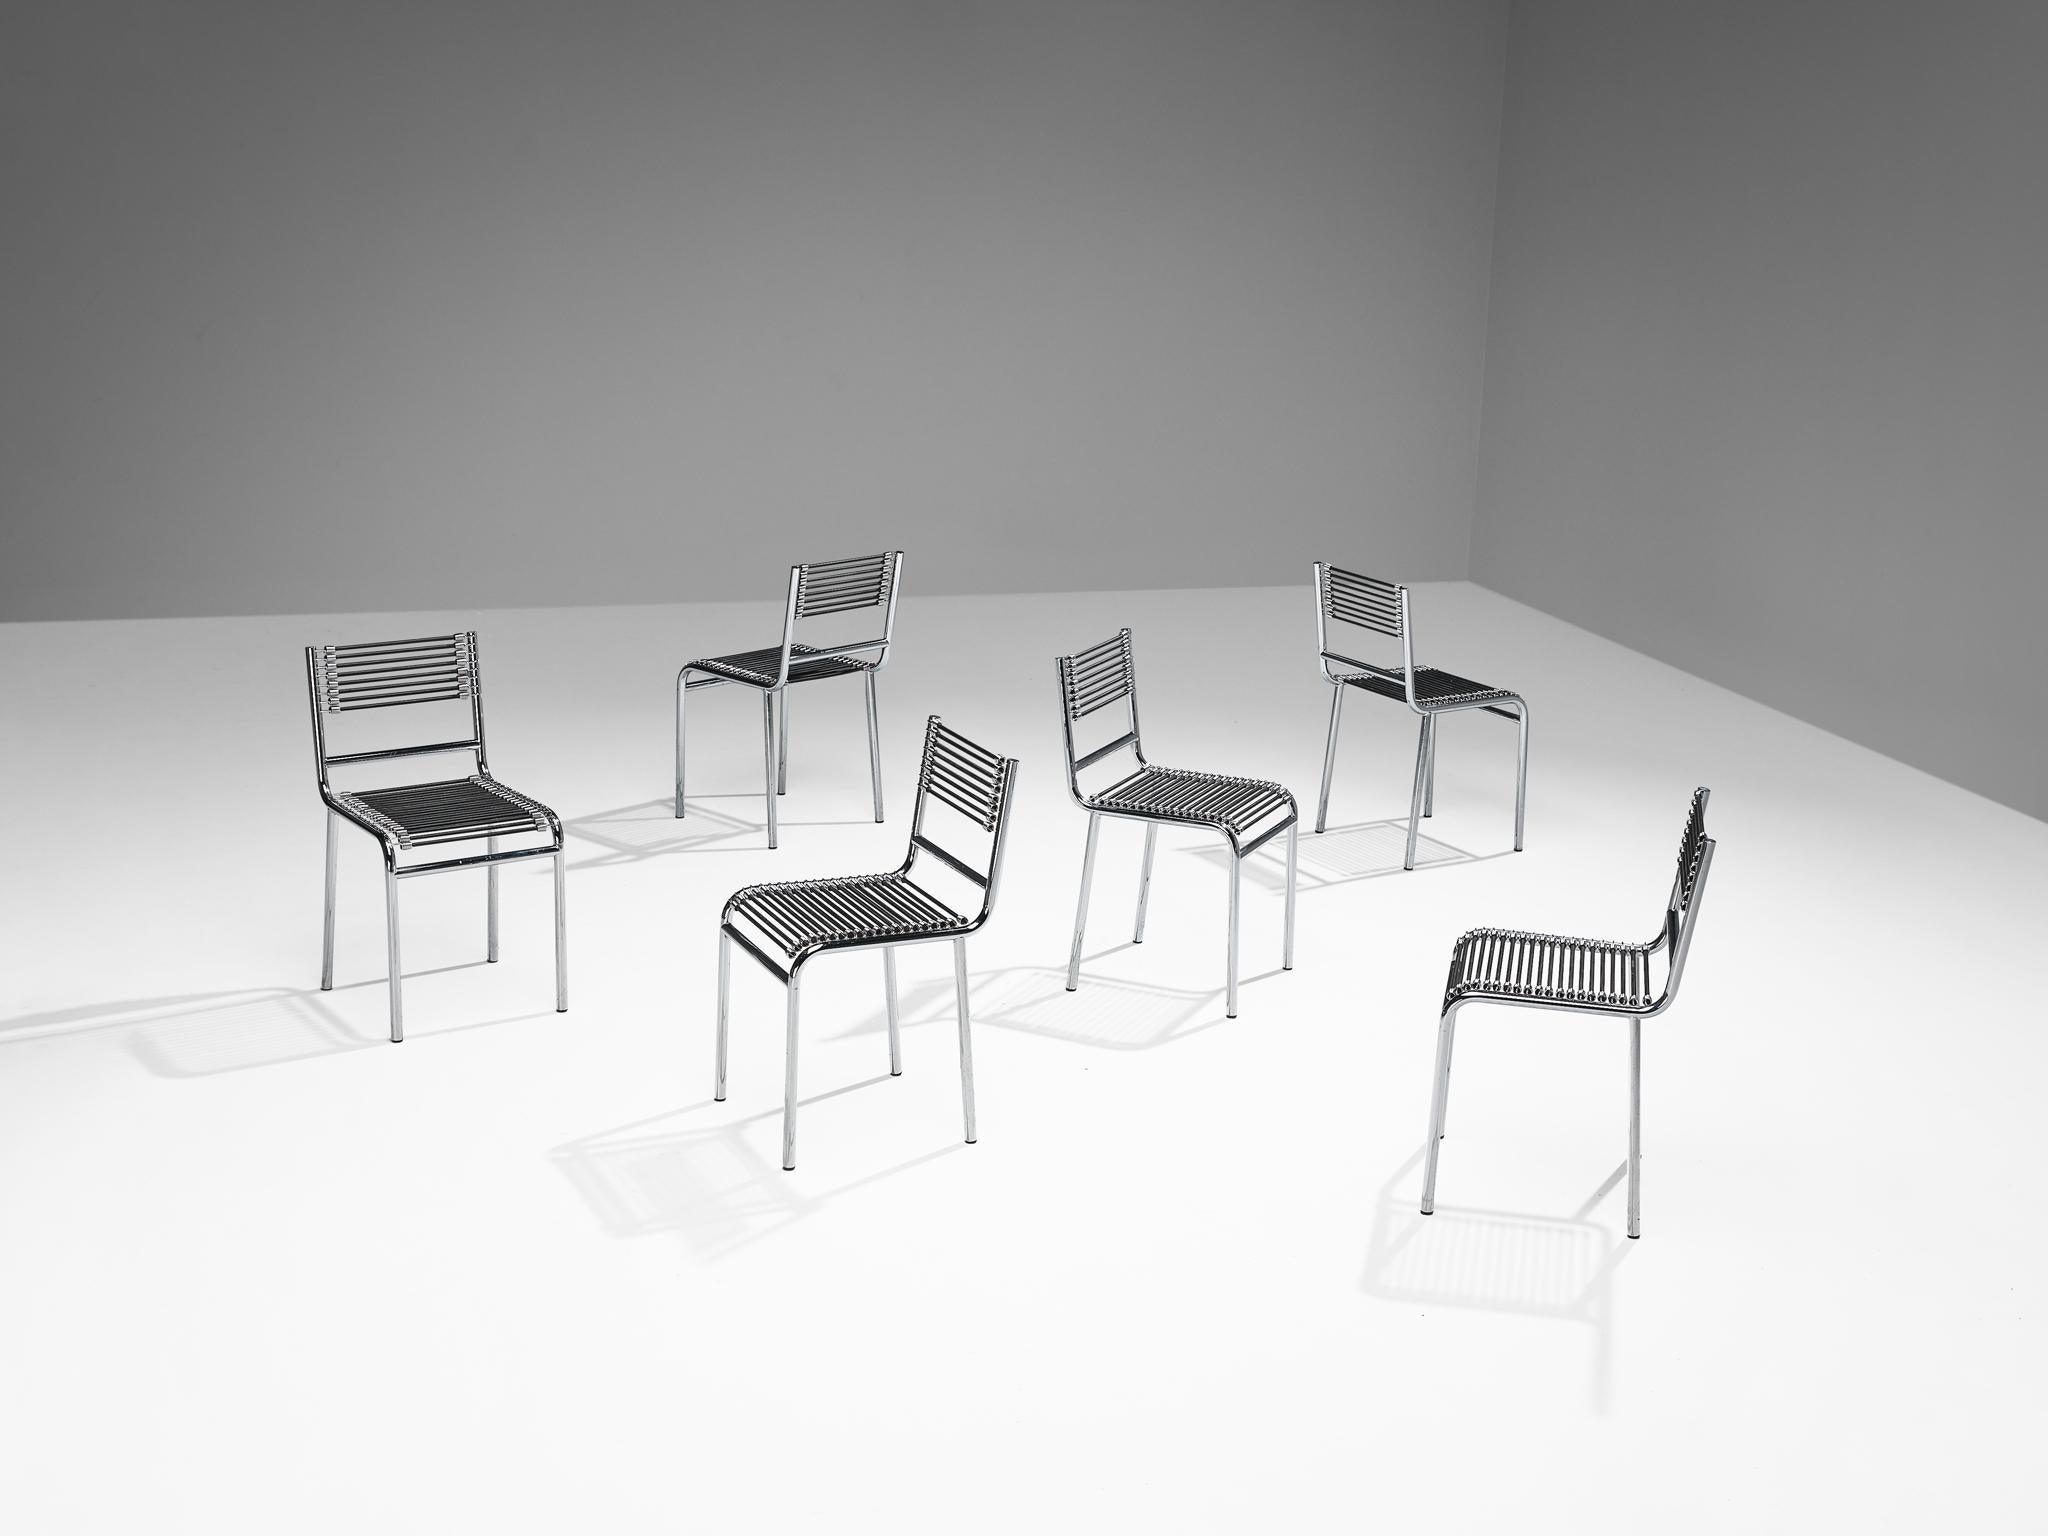 René Herbst, 'Sandows' chairs, model '101', chrome-plated steel, elastic rope, France, design 1928, produced 1970s.

The 'Sandows' chair epitomizes the industrial advancements of the twenties, featuring a tubular steel construction integrated with